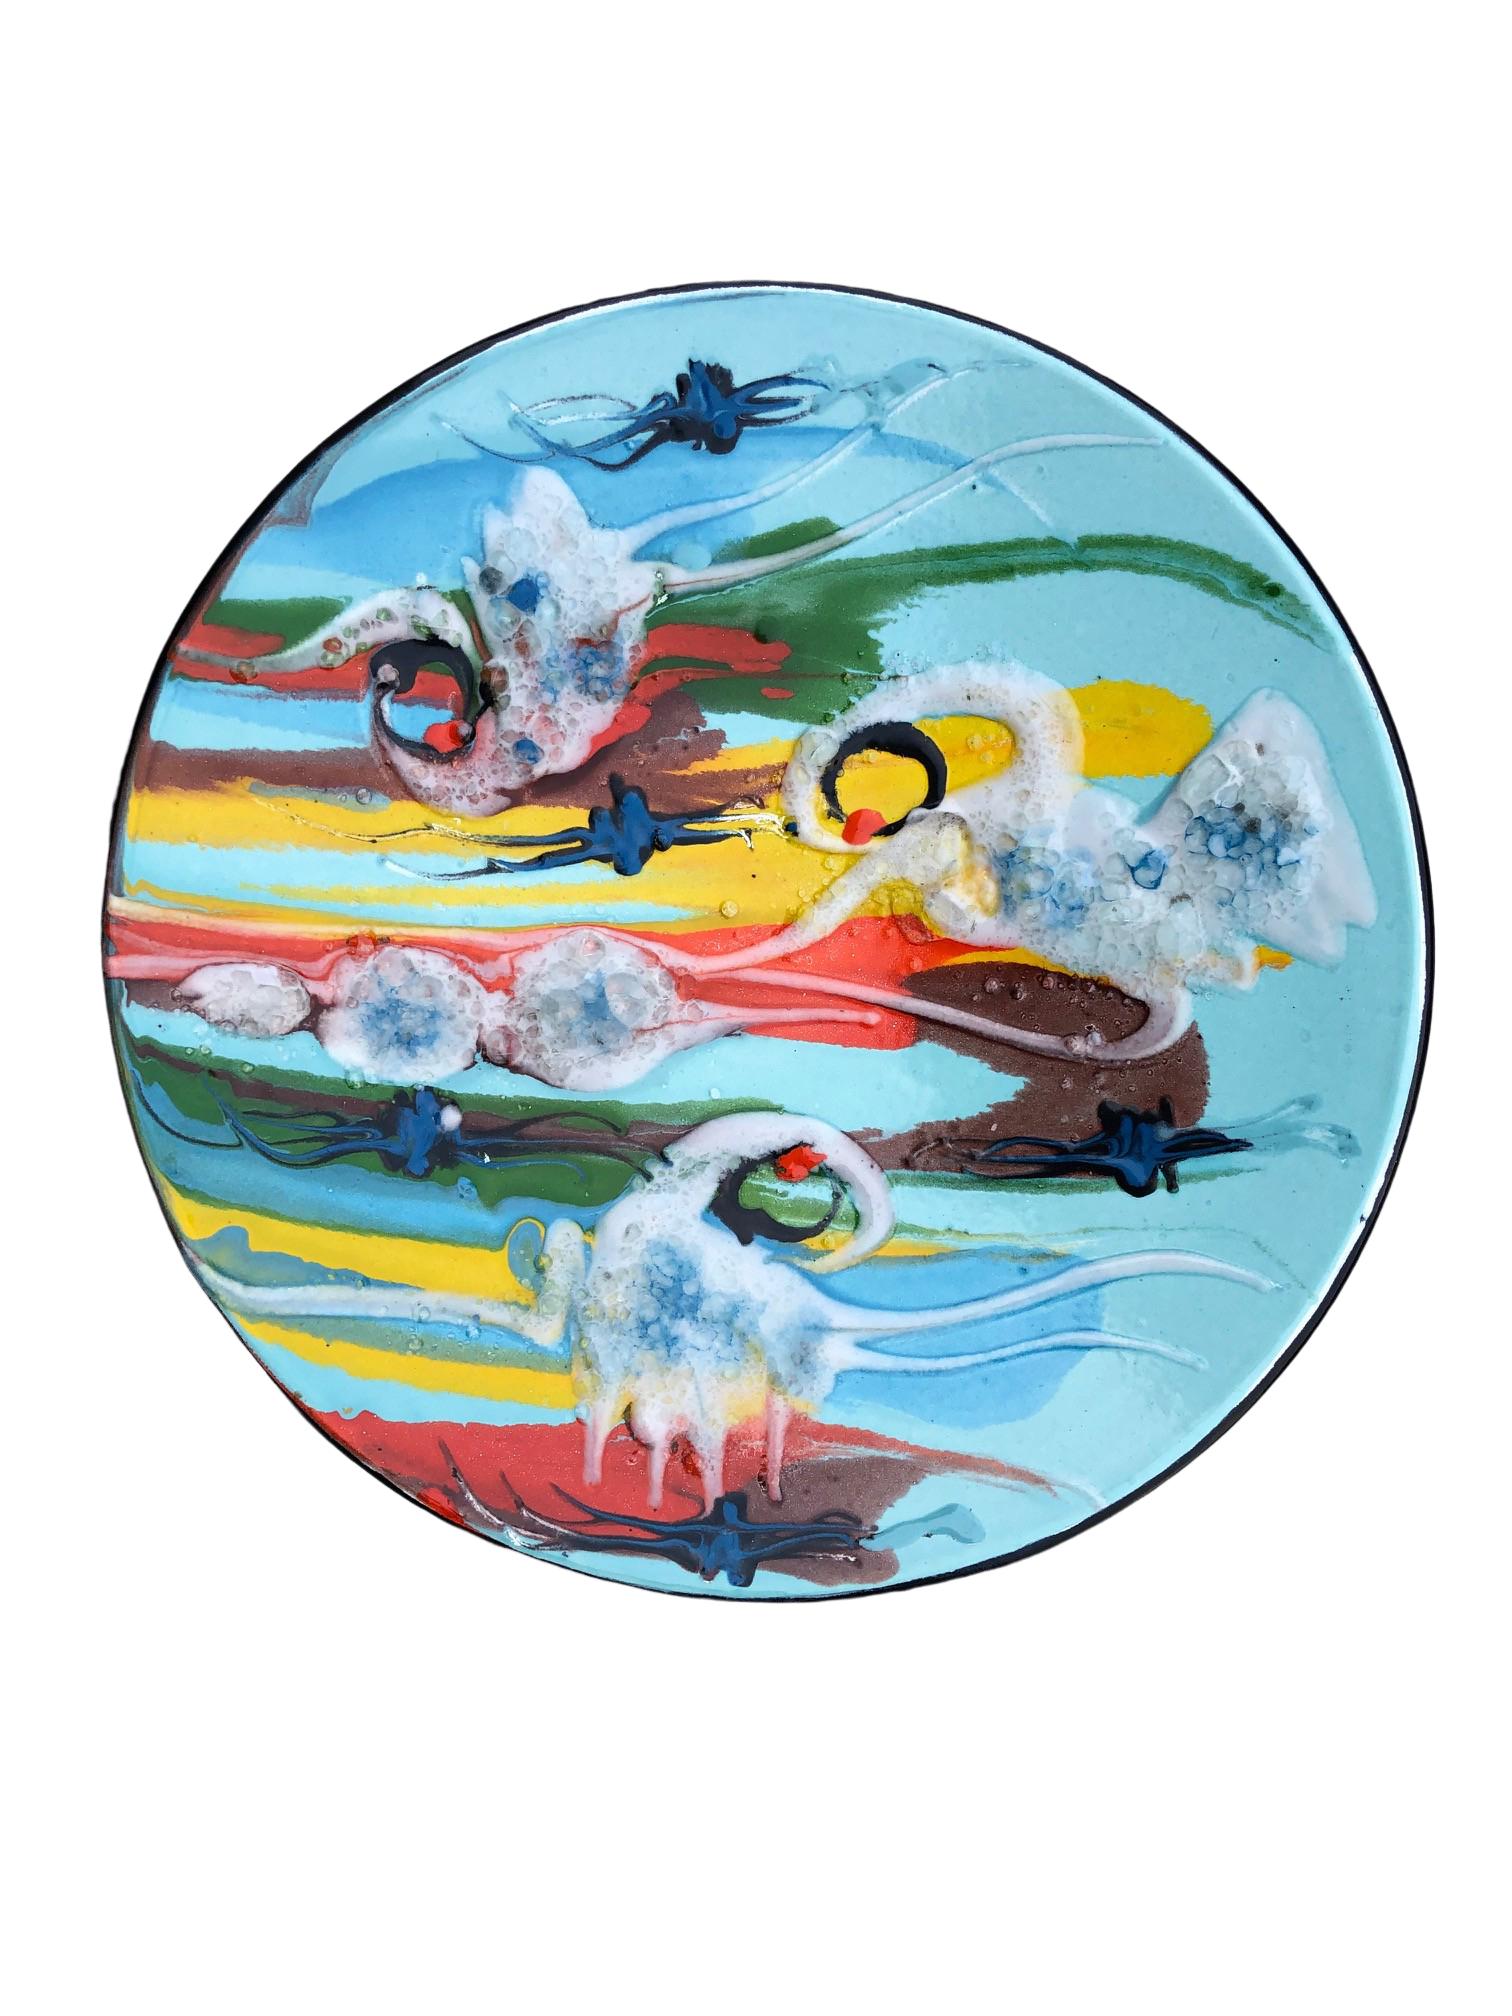 Enamel Plate with an Abstract Pattern in Vivid Colors, Europe, 1960s For Sale 6